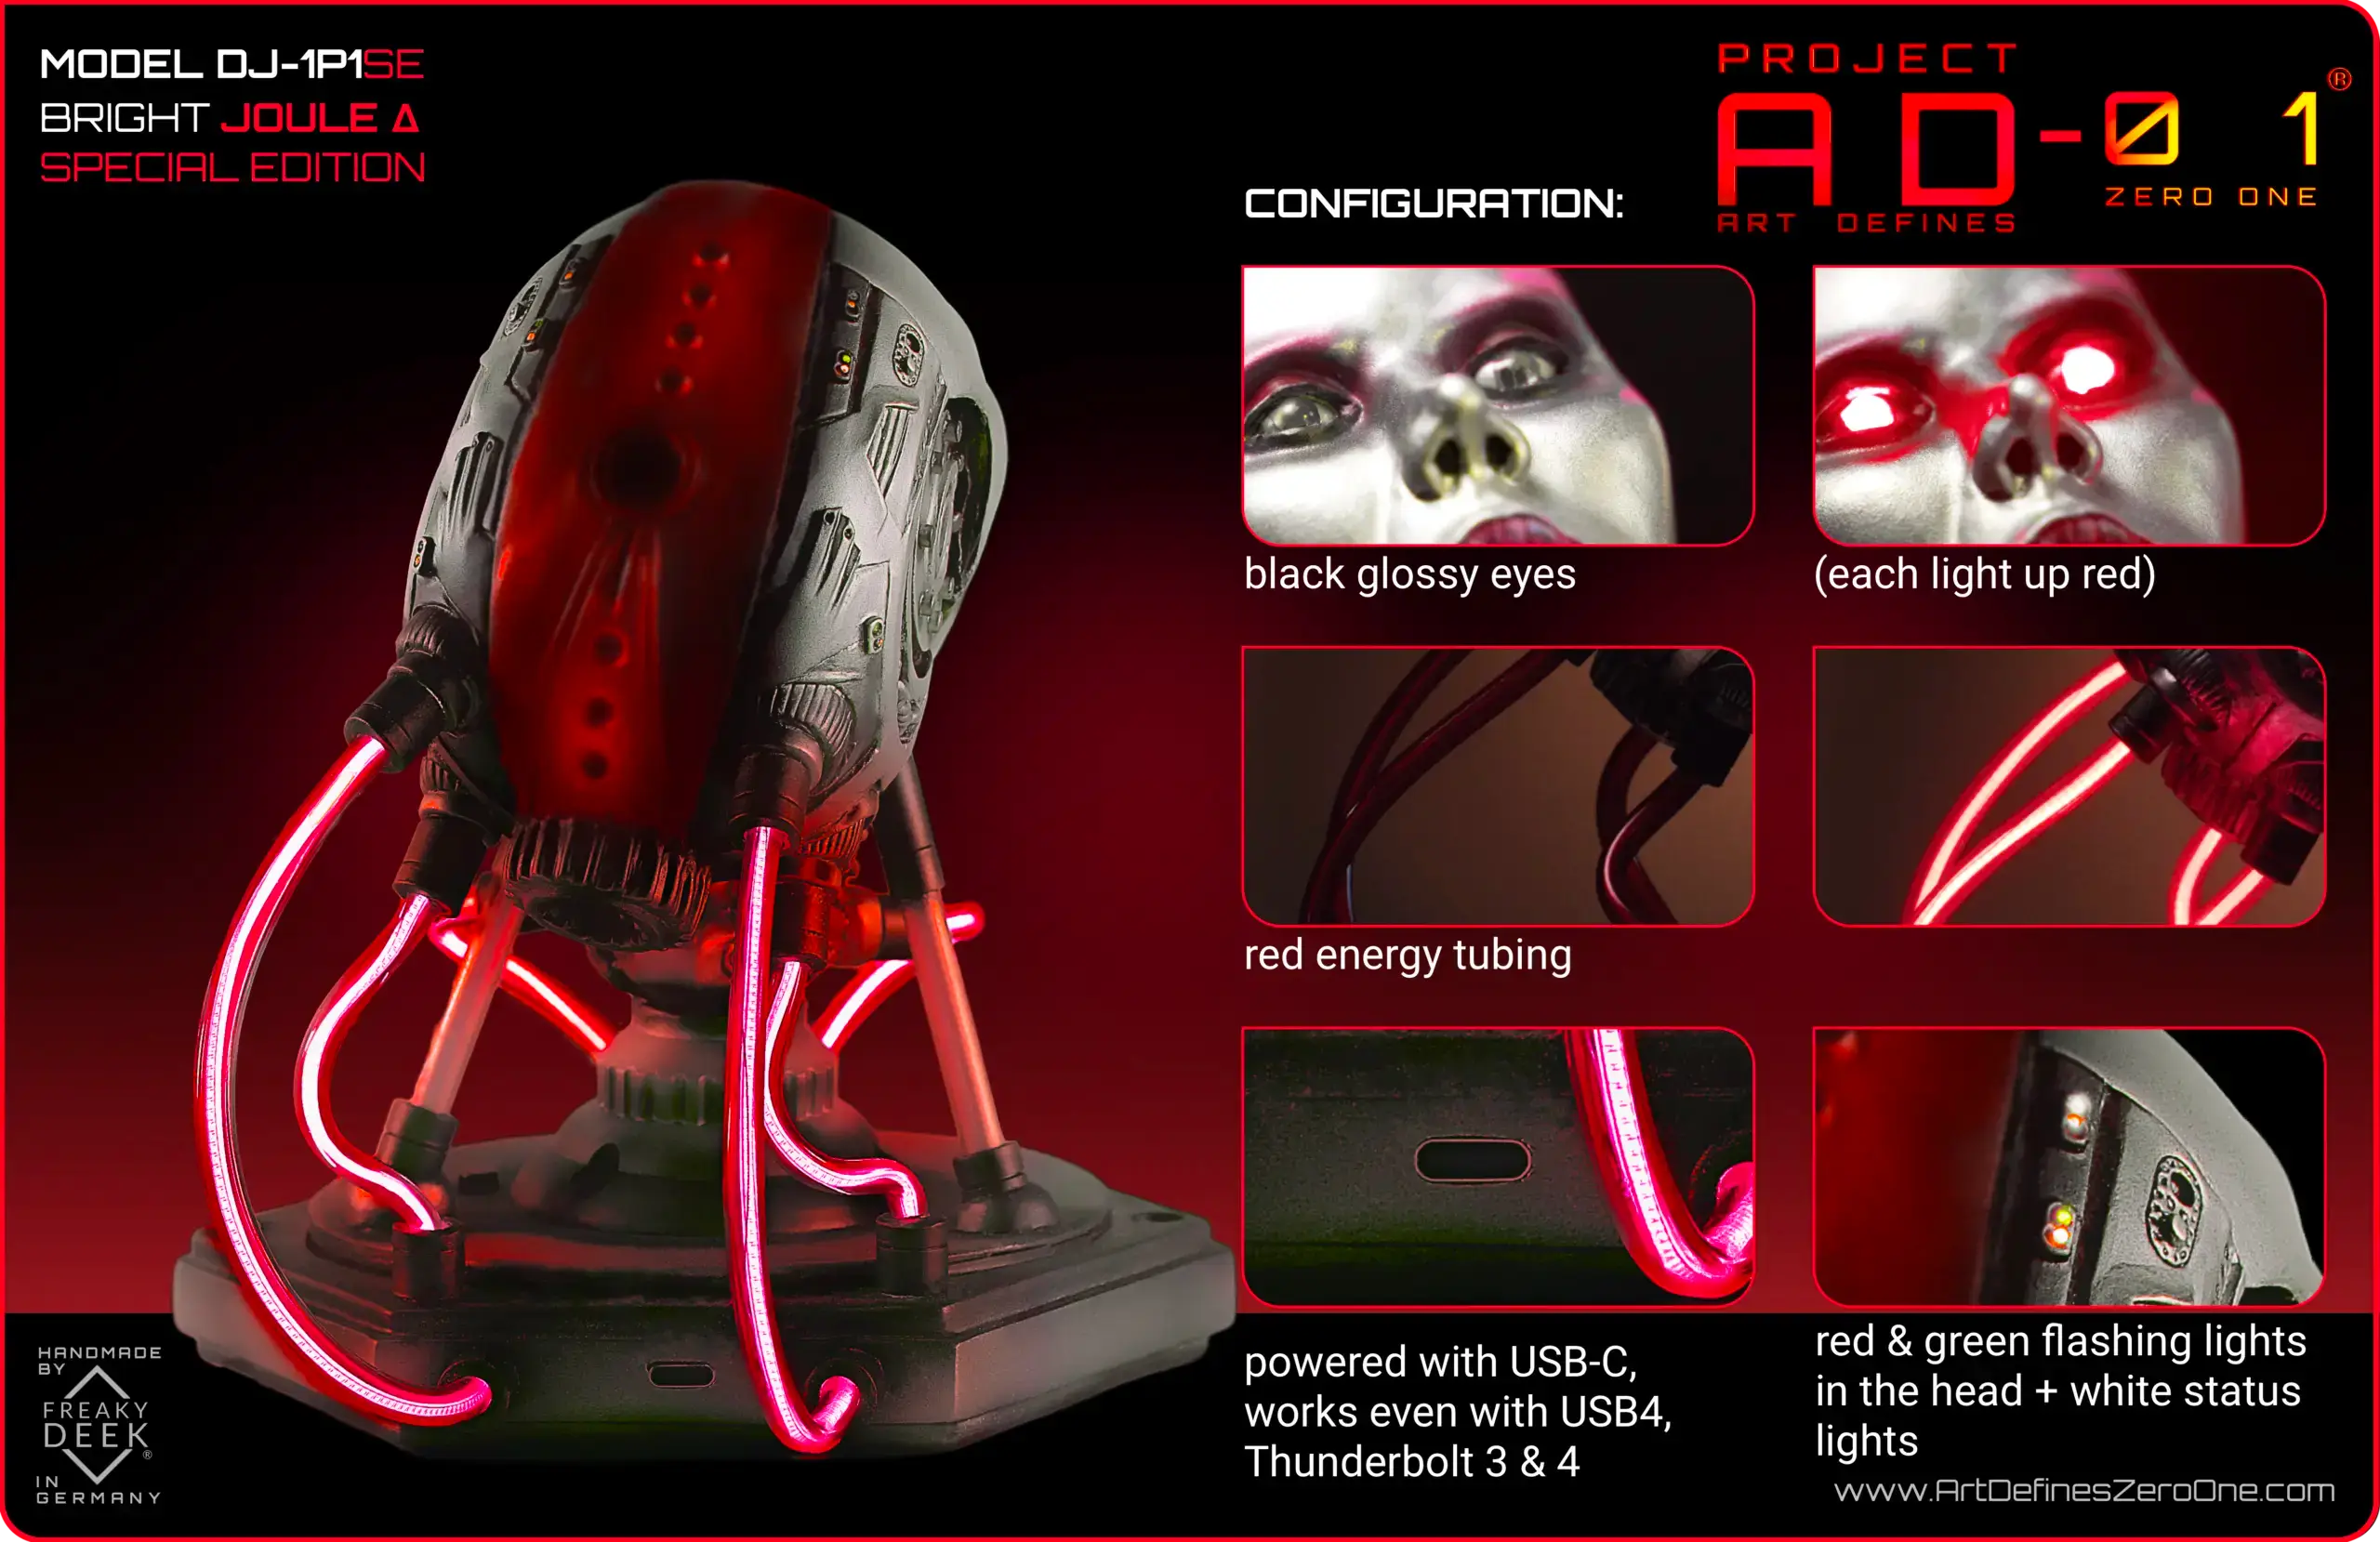 Project AD-01 handmade android sculpture Joule with red LED energy tubes, product configuration: silver, humanized LED eyes, with electronics, USB-C, red metallic design, flashing LEDs, weight: apx. 800g